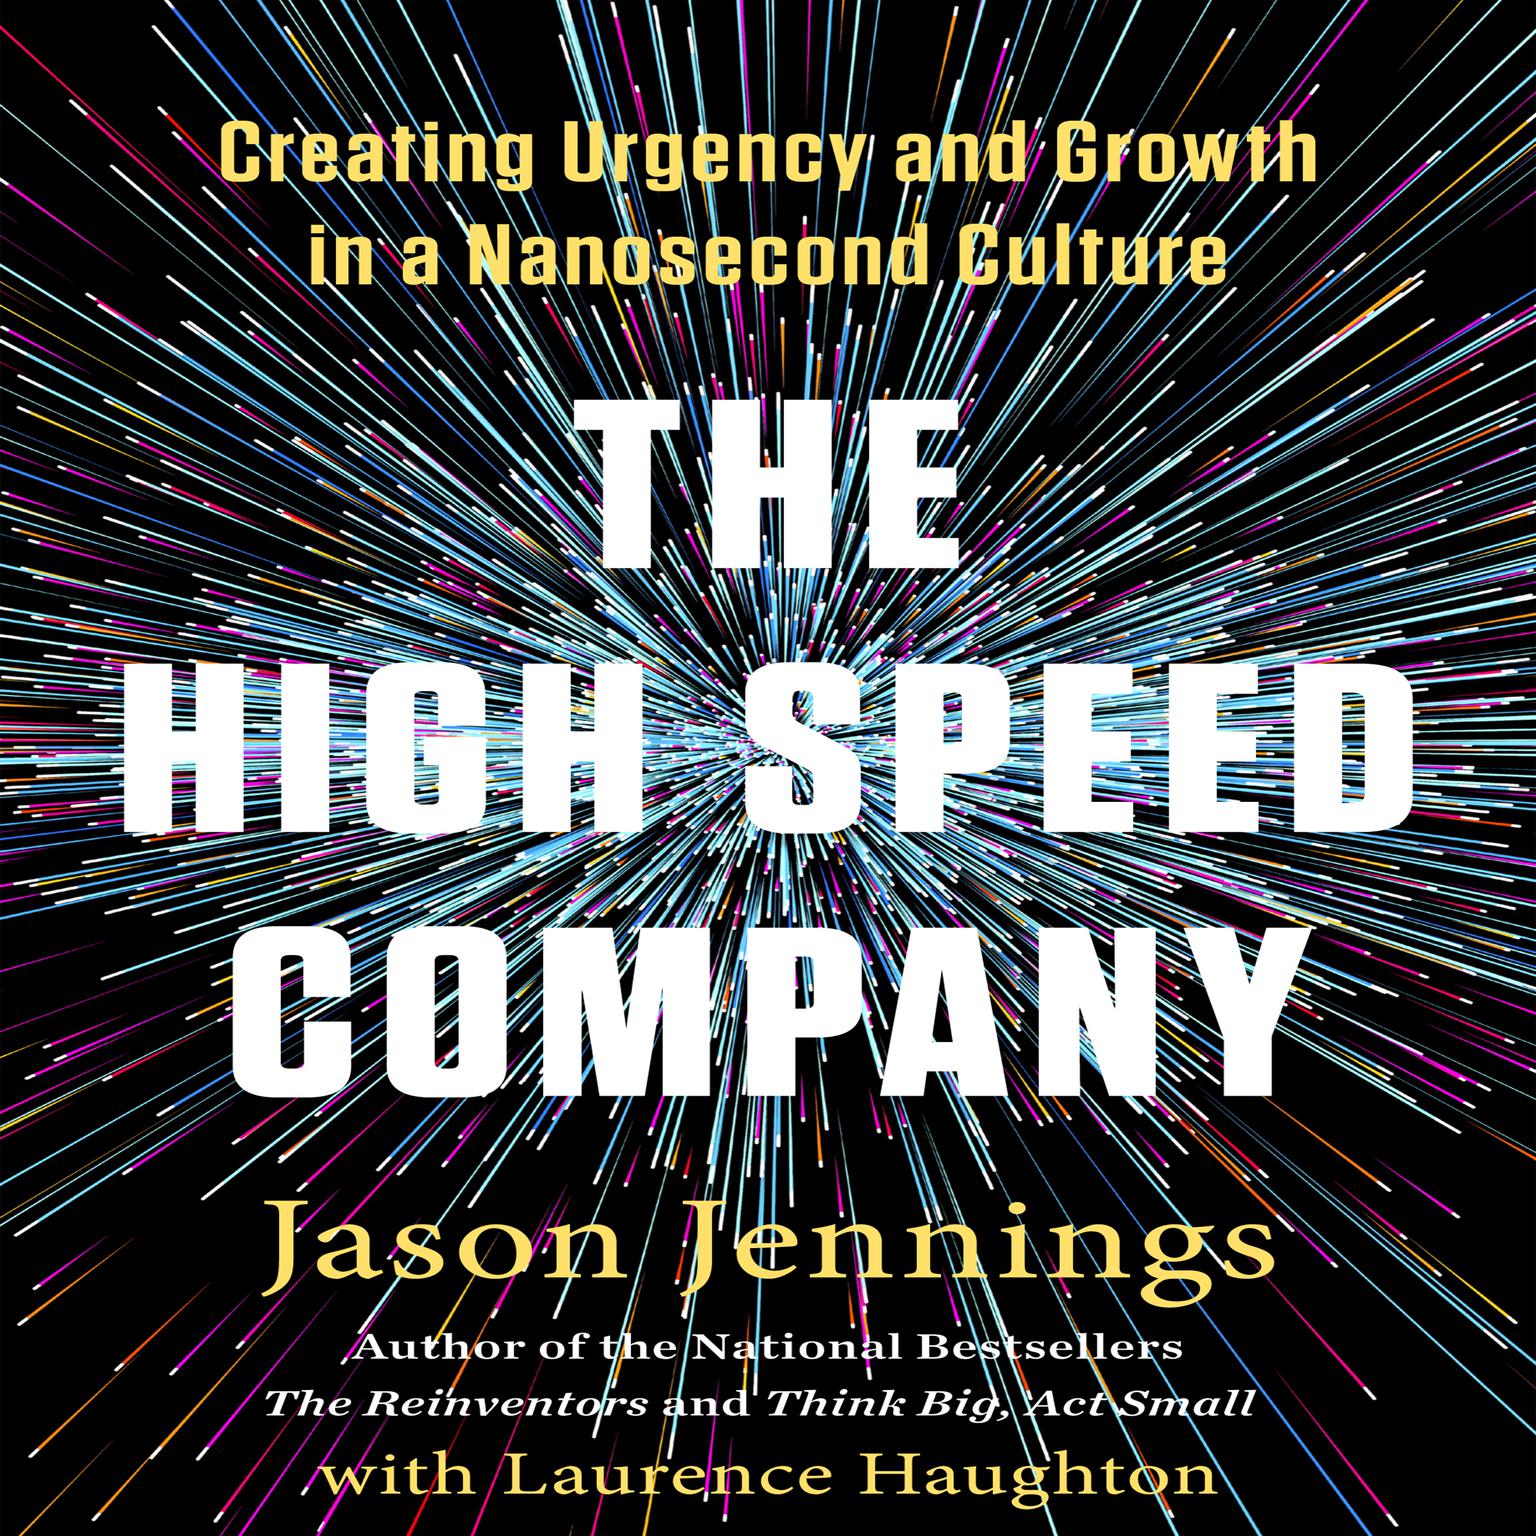 The High-Speed Company: Creating Urgency and Growth in a Nanosecond Culture Audiobook, by Jason Jennings